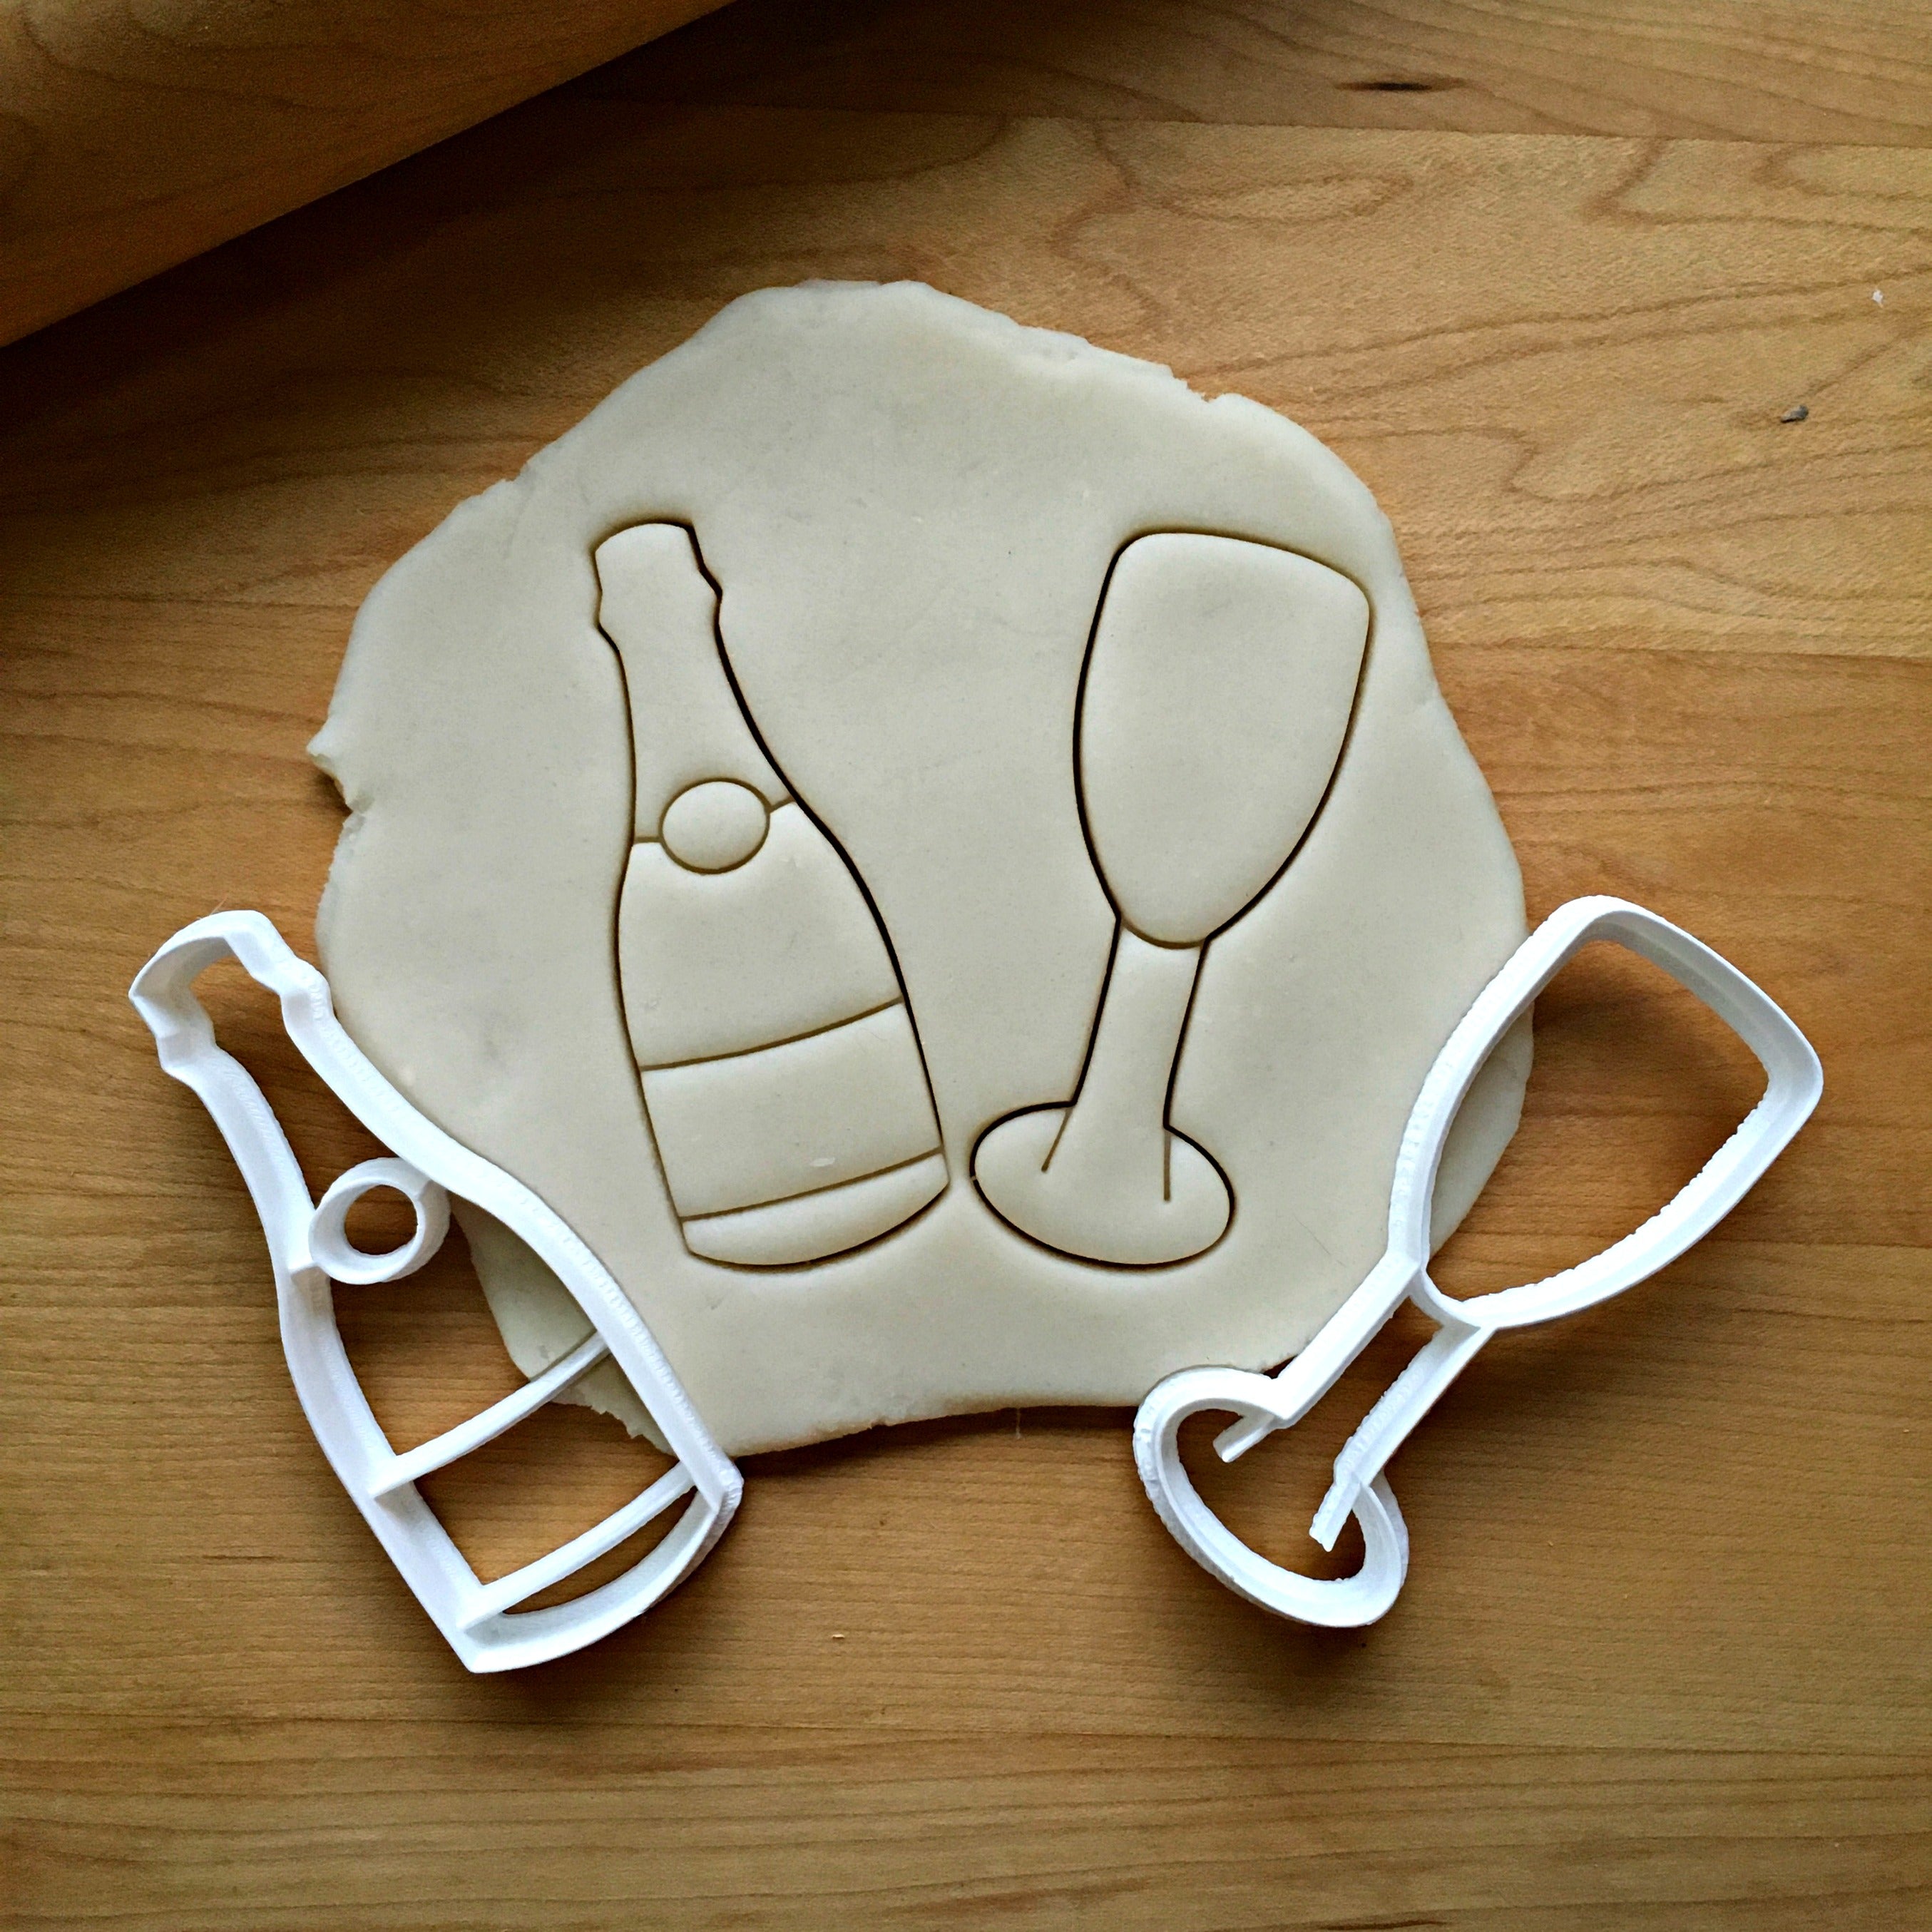 Champagne Glass and Bottle Cookie Cutter Set/Dishwasher Safe